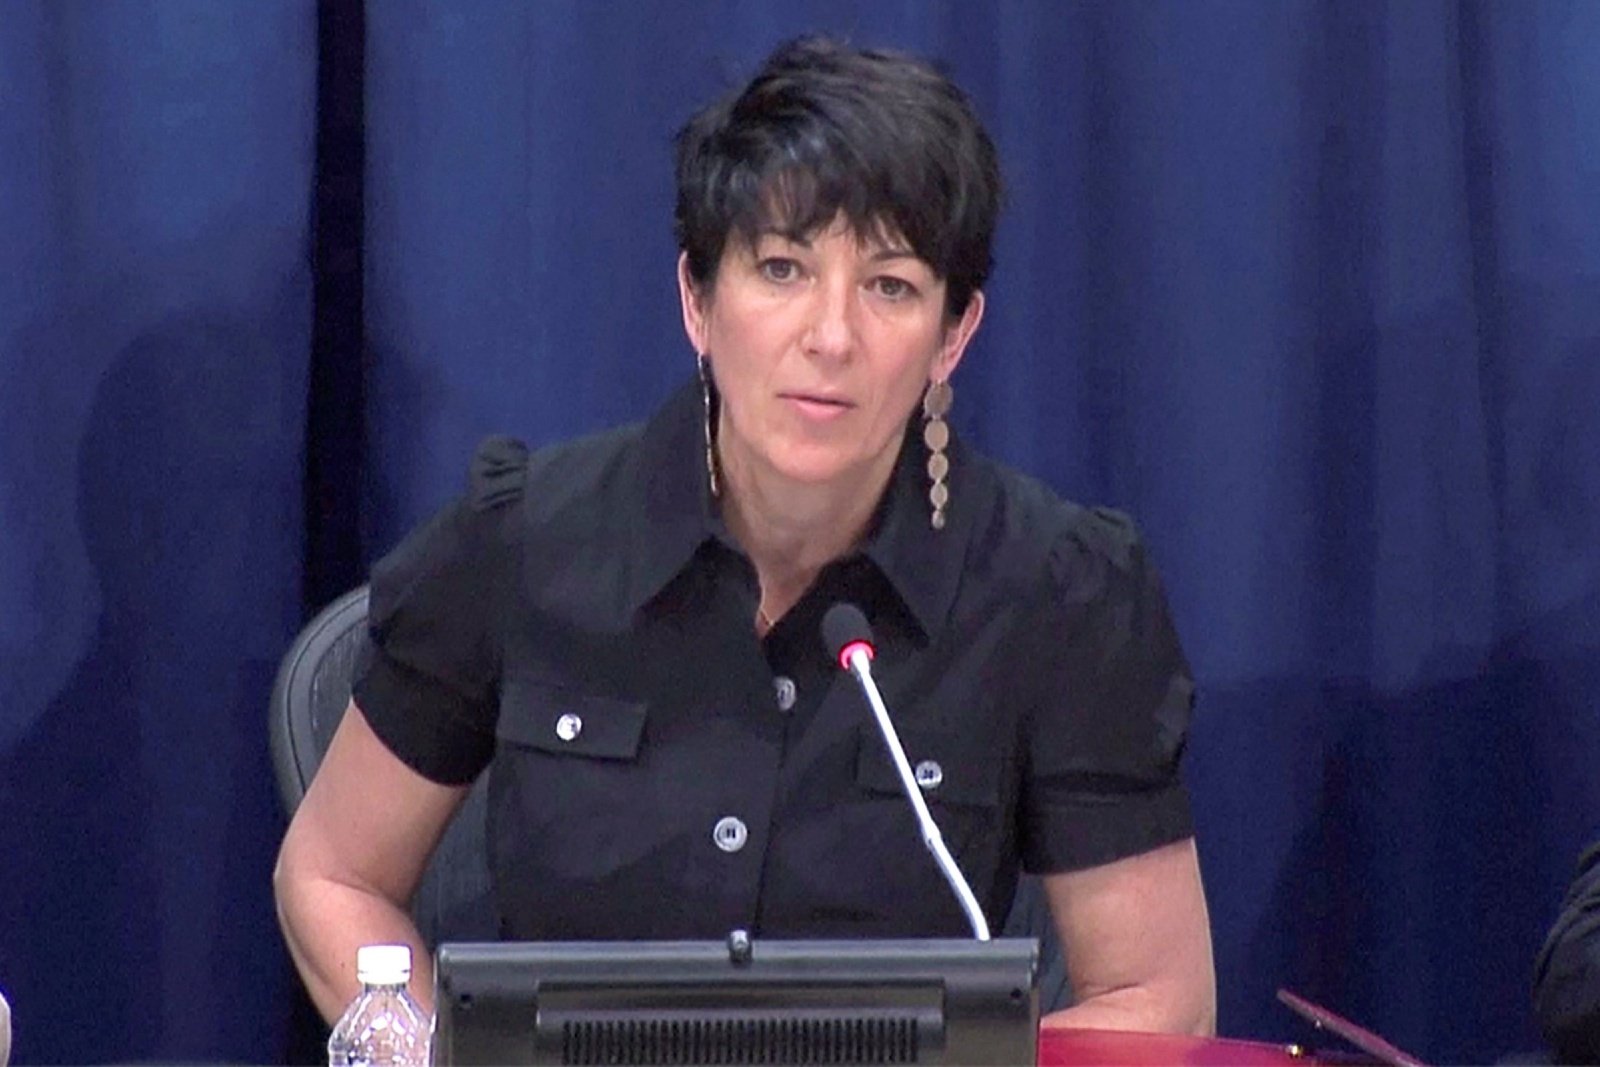 Ghislaine Maxwell has been fighting for her accusers to be named. While they won't be made public, will Maxwell find out who her accusers are?